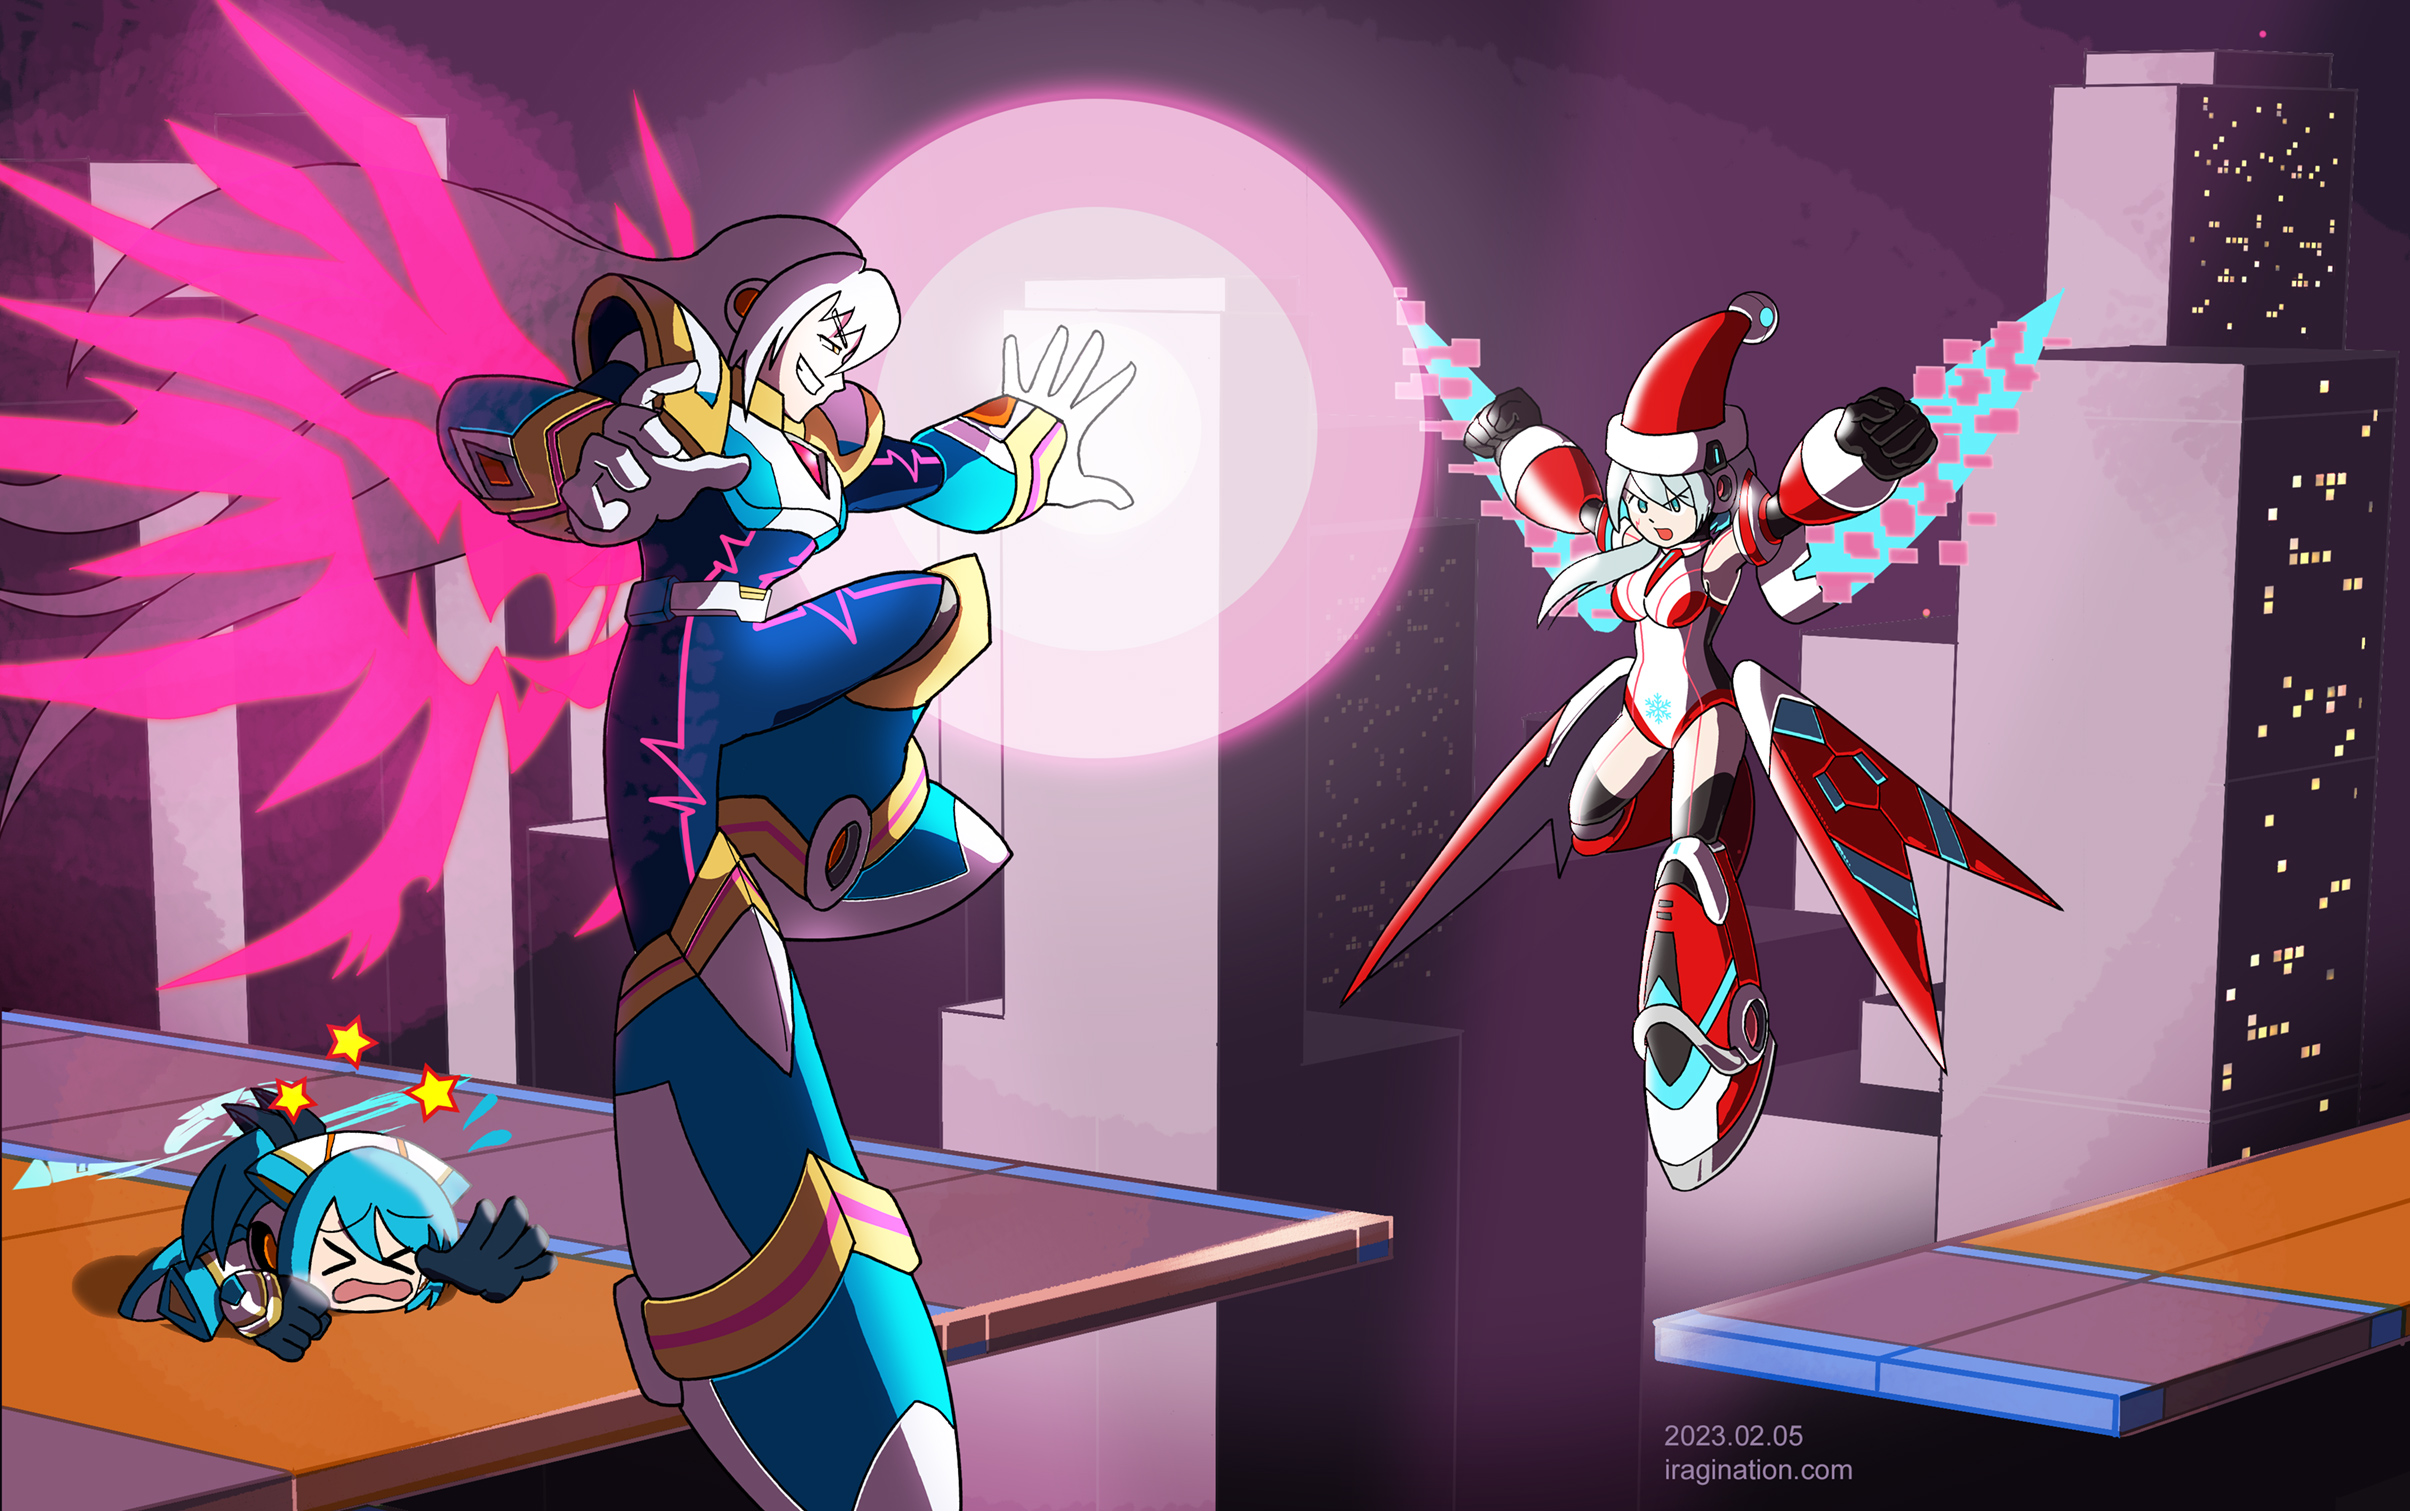 ViA■ vs Christmas iCO – PVP Showcase
[b]Mega Man X DiVE[/b] has released the finale of the story arc it started in 2019-2020. I began working on this illustration based on a trailer posted a few days before. So, this is a spoiler-free post to give everyone time to catch up with the ending event.

In the aforementioned [url=https://youtu.be/6na-yNq3MVA]trailer[/url], the poor [b]RiCO[/b] once more is used as a punching bag to promote the new character, [b]ViA■[/b]. She gets killed three times. And ViA’s streak only ends because apparently, [url=https://youtu.be/iBBTwzj3M8g]Christmas iCO[/url] is able to hold her ground against him before the feed is cut off. Well, don’t look too much into it. I just found it funny and wanted to practice an action scene.

Mega Man X DiVE © CAPCOM
Keywords: via rico ico